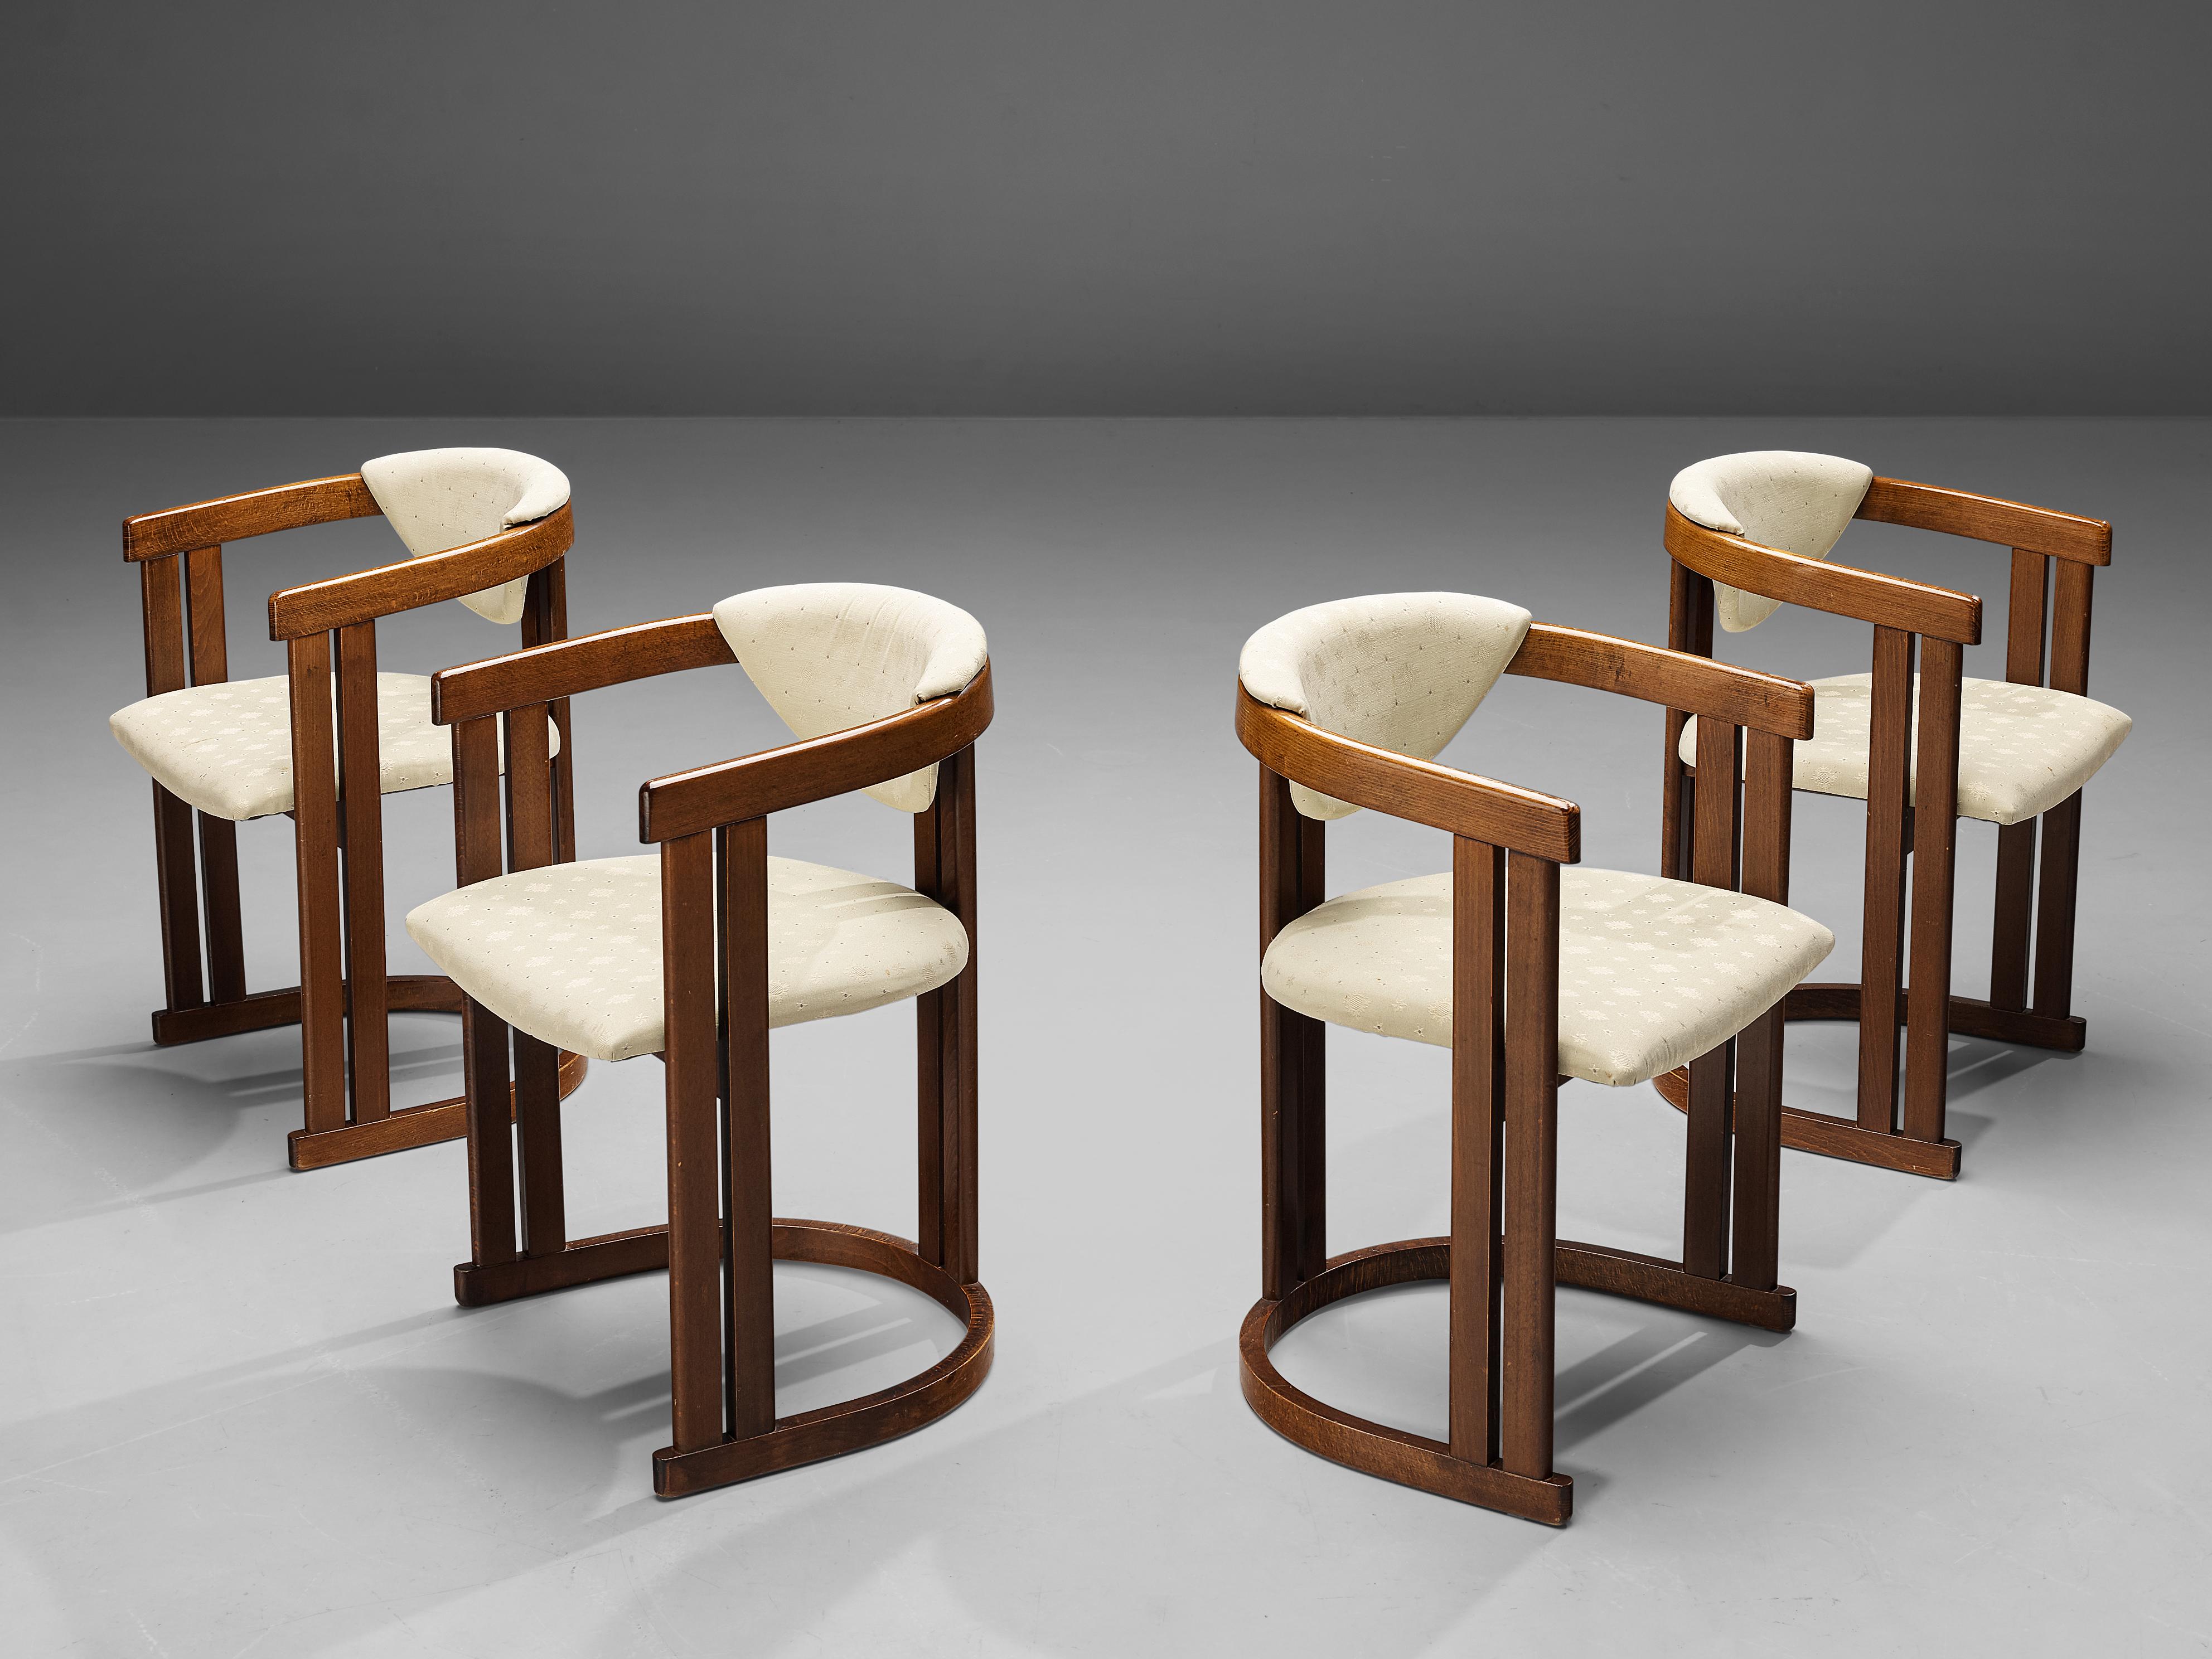 Set of four dining chairs, beech, fabric, Italy, 1960s

Italian dining chairs with white, subtle patterned upholstery. These truly elegant dining chairs feature a semicircular form. The user is surrounded by the rounded arm- and backrest. Three